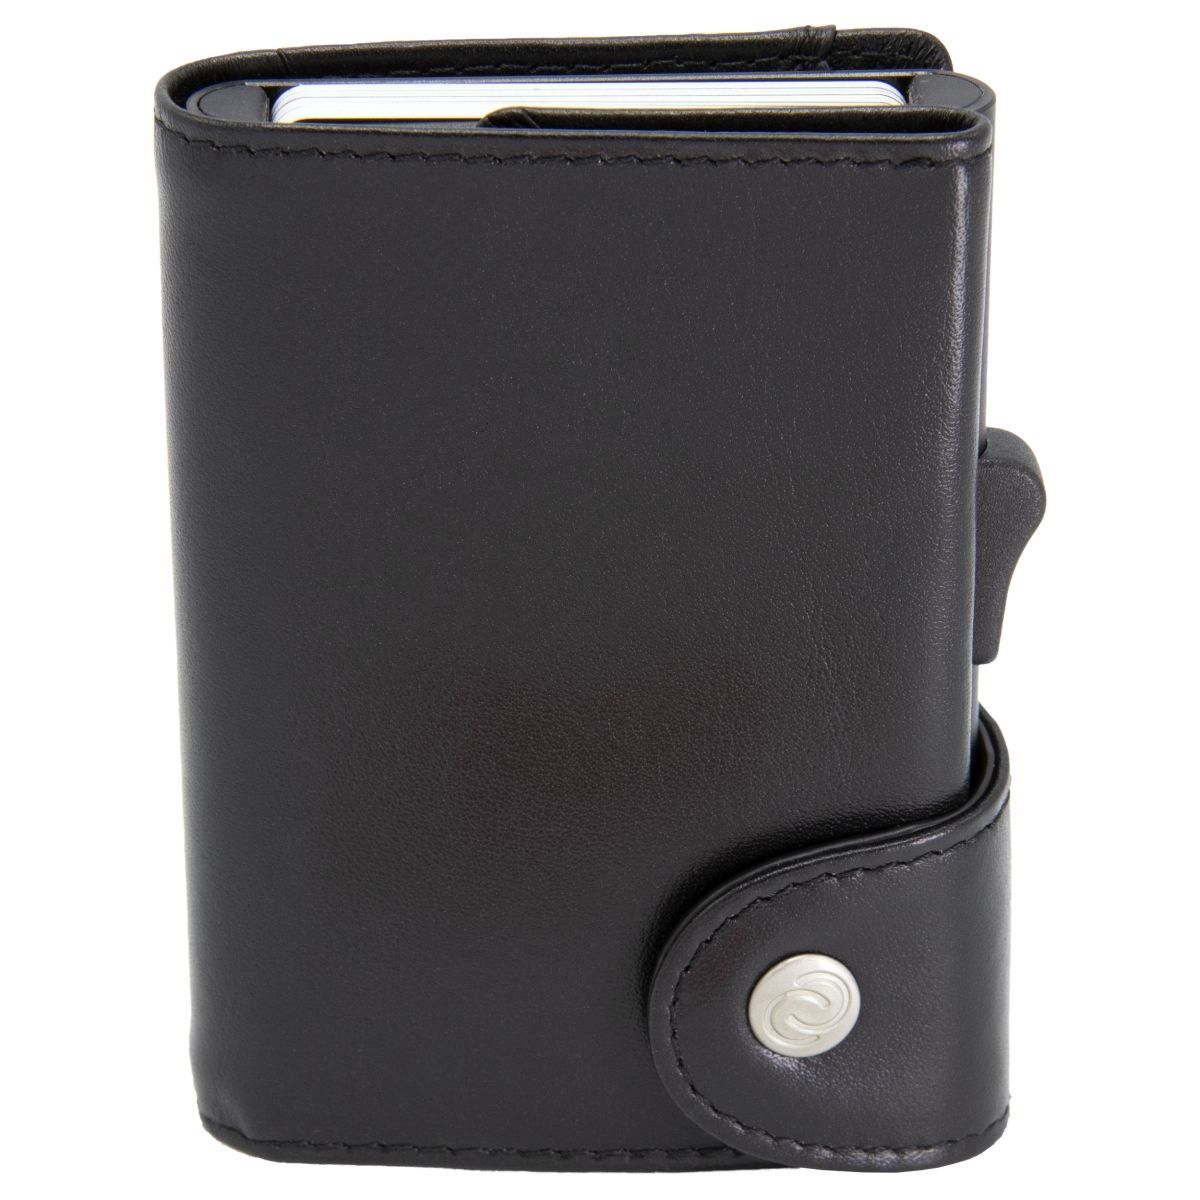 XL Aluminum Card Holder with Genuine Leather - Black